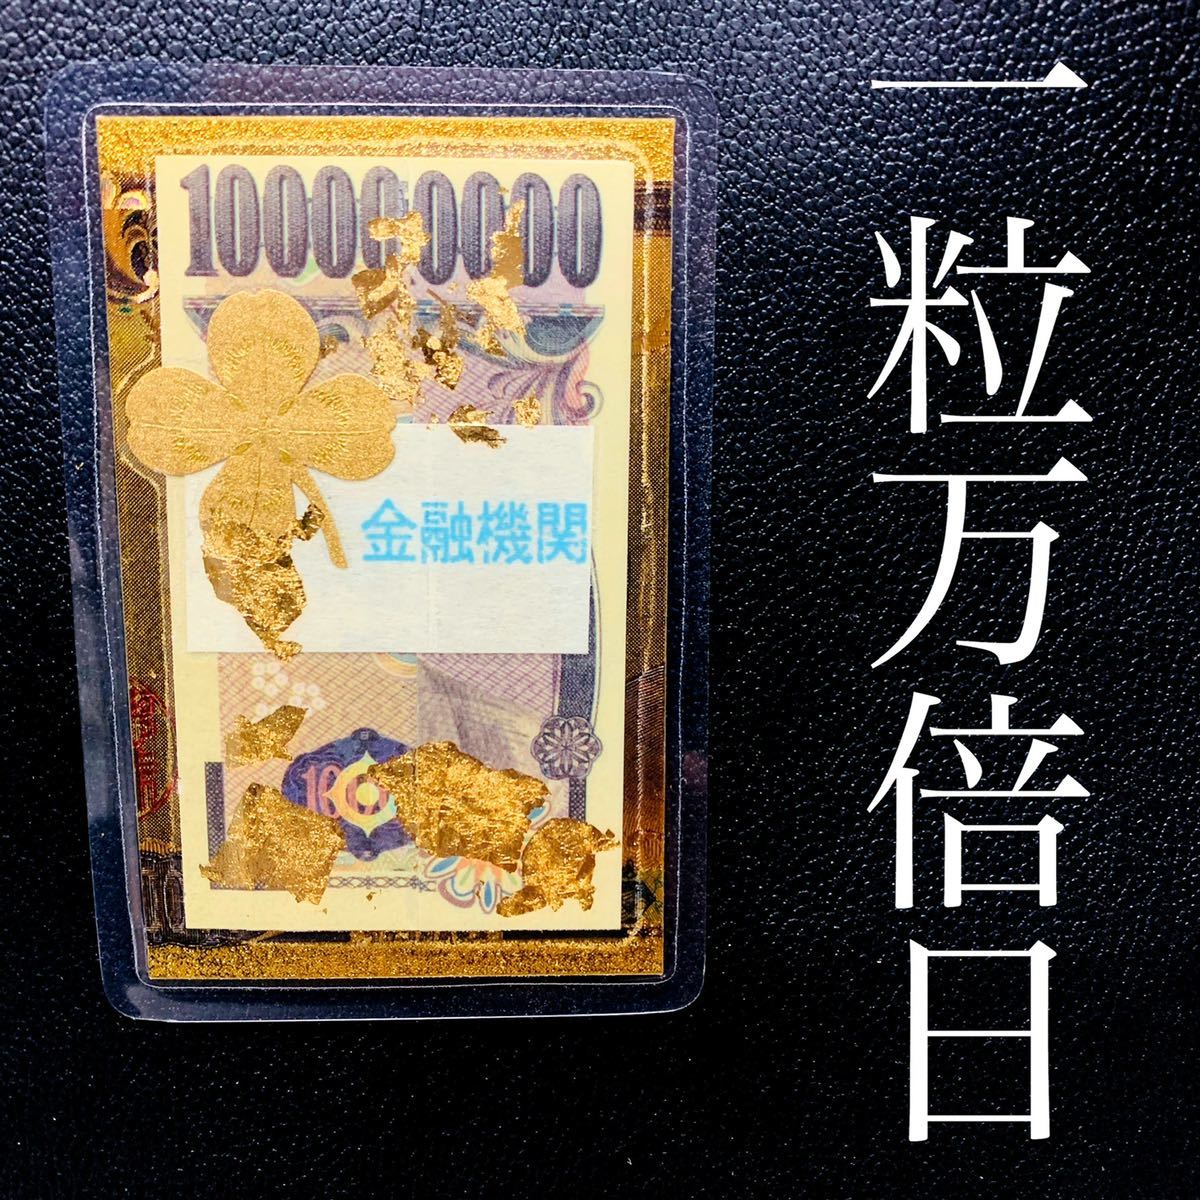 Completed Ichiryu Manbai Day★100 million yen bill card gold leaf★Increase your luck★GOLD24k★Good luck★Lottery★Charm★Fukuzawa Yukichi★Feng Shui handmade, wallet, Men's, Long wallet (with coin purse)